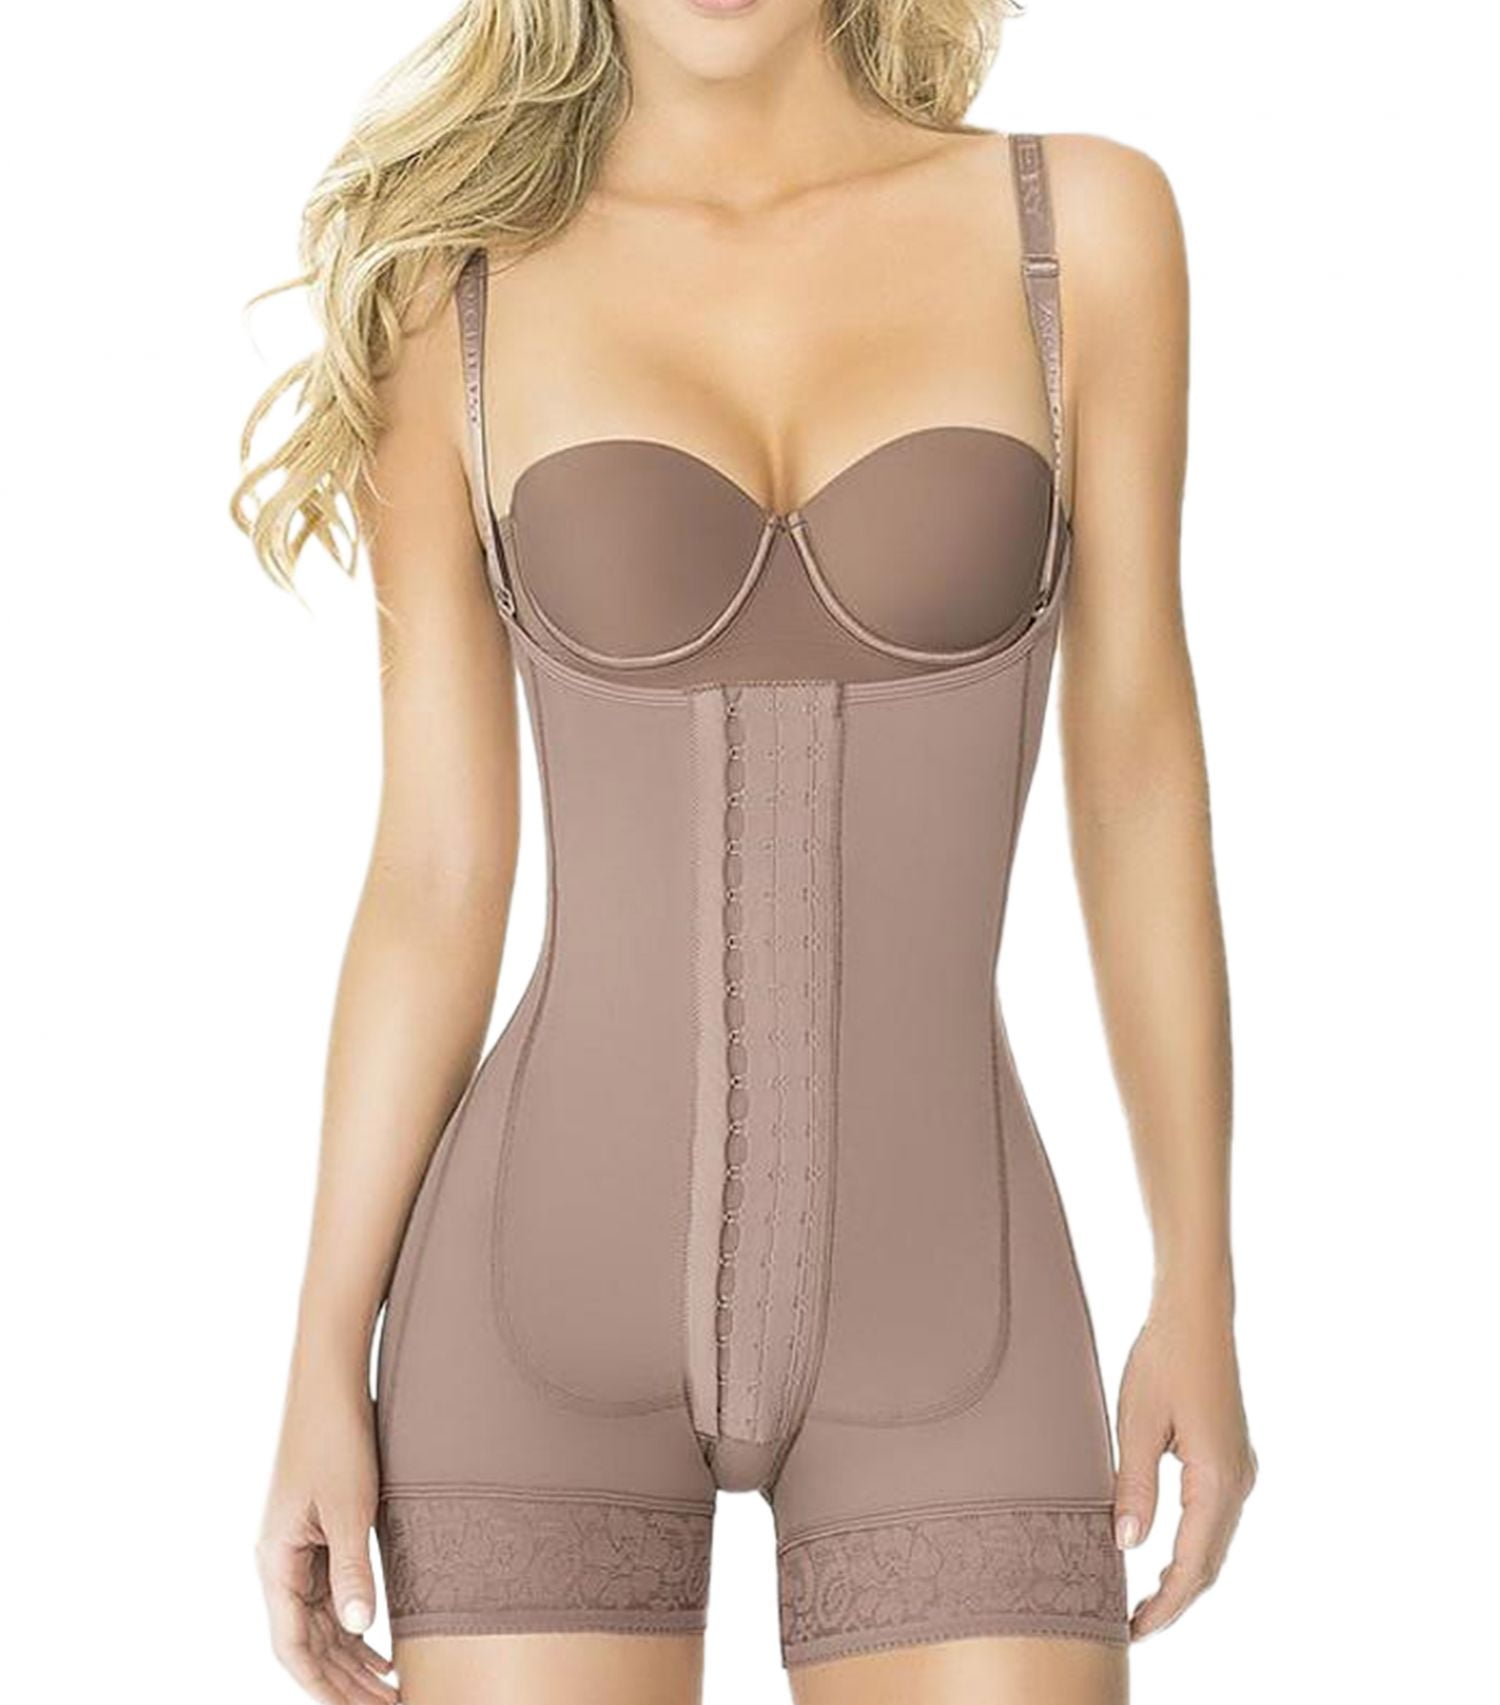 Ann Chery Powernet Body Fiorell Color Beige Size XS 1043 